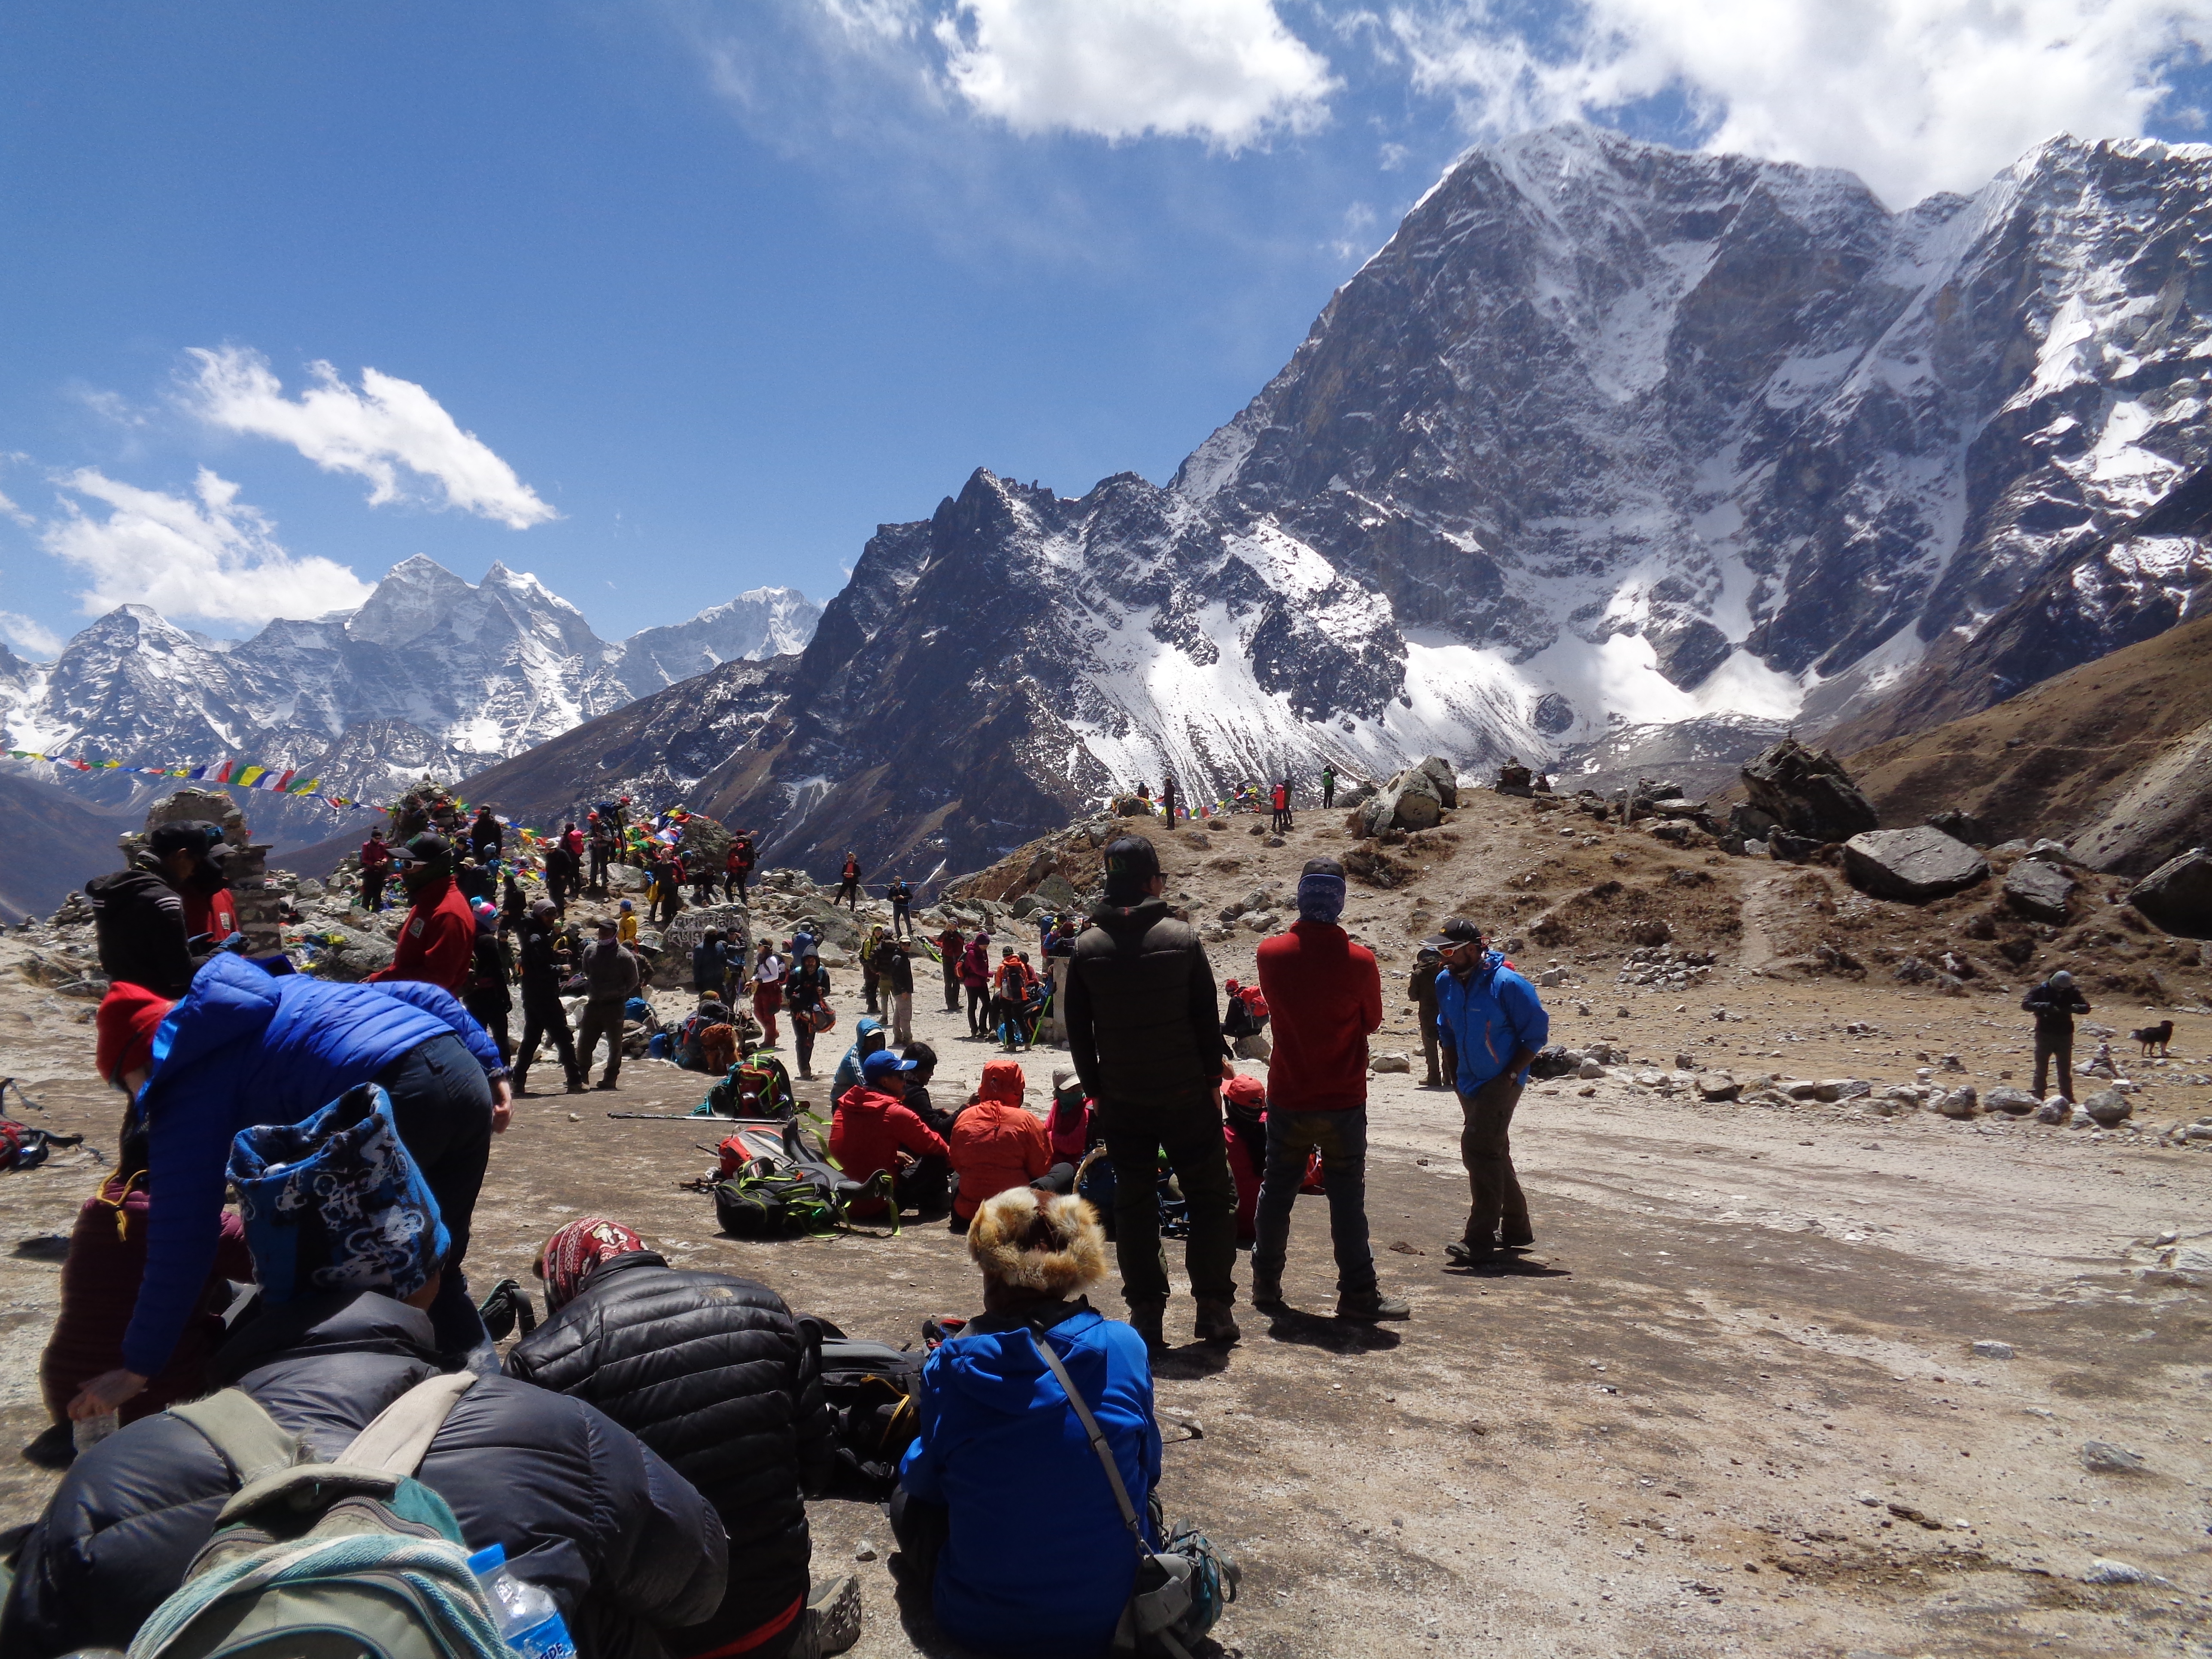 The best months to trek to Everest Base Camp